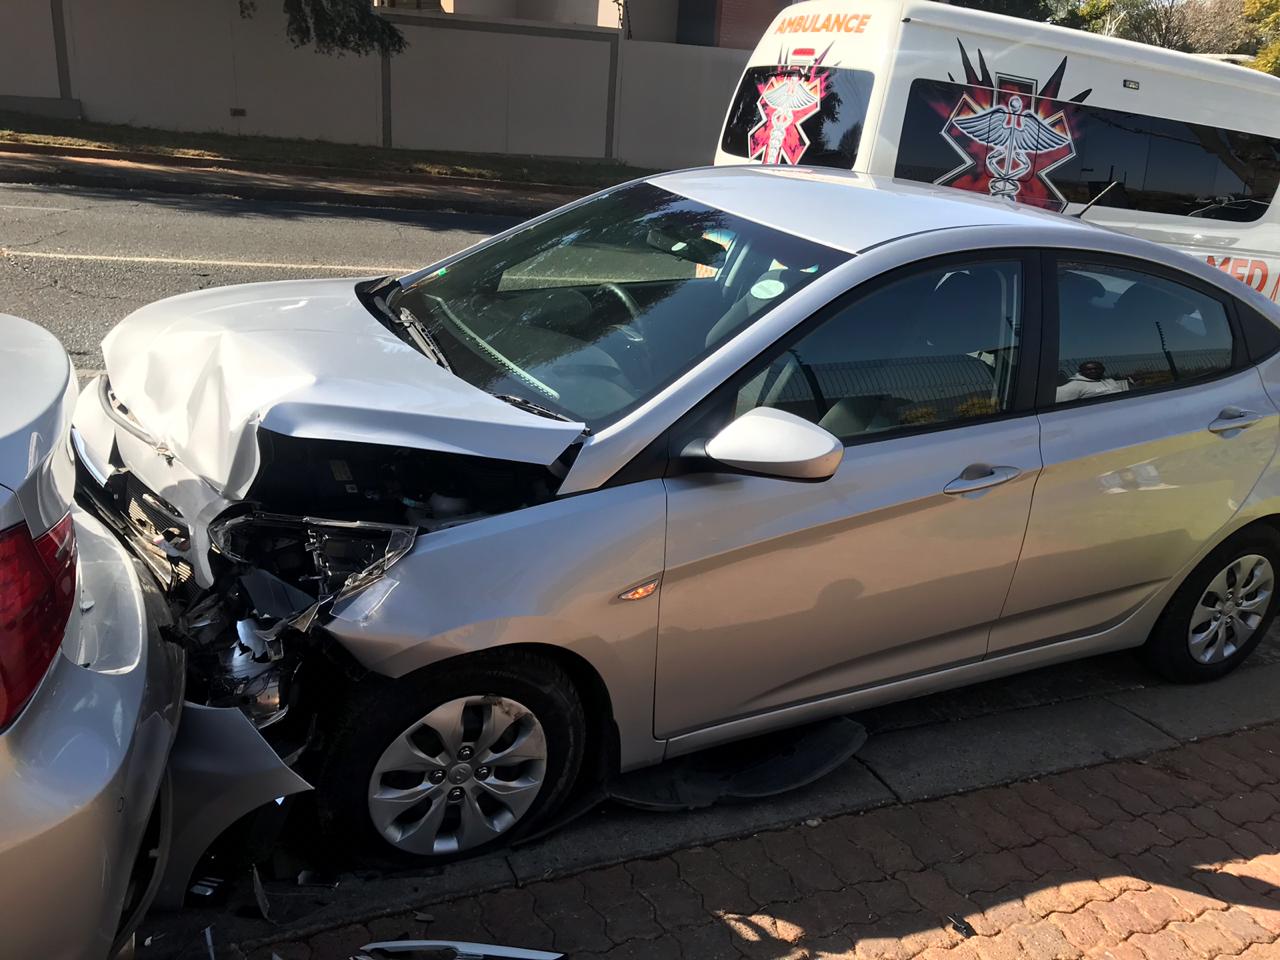 One person injured in road crash in Linden